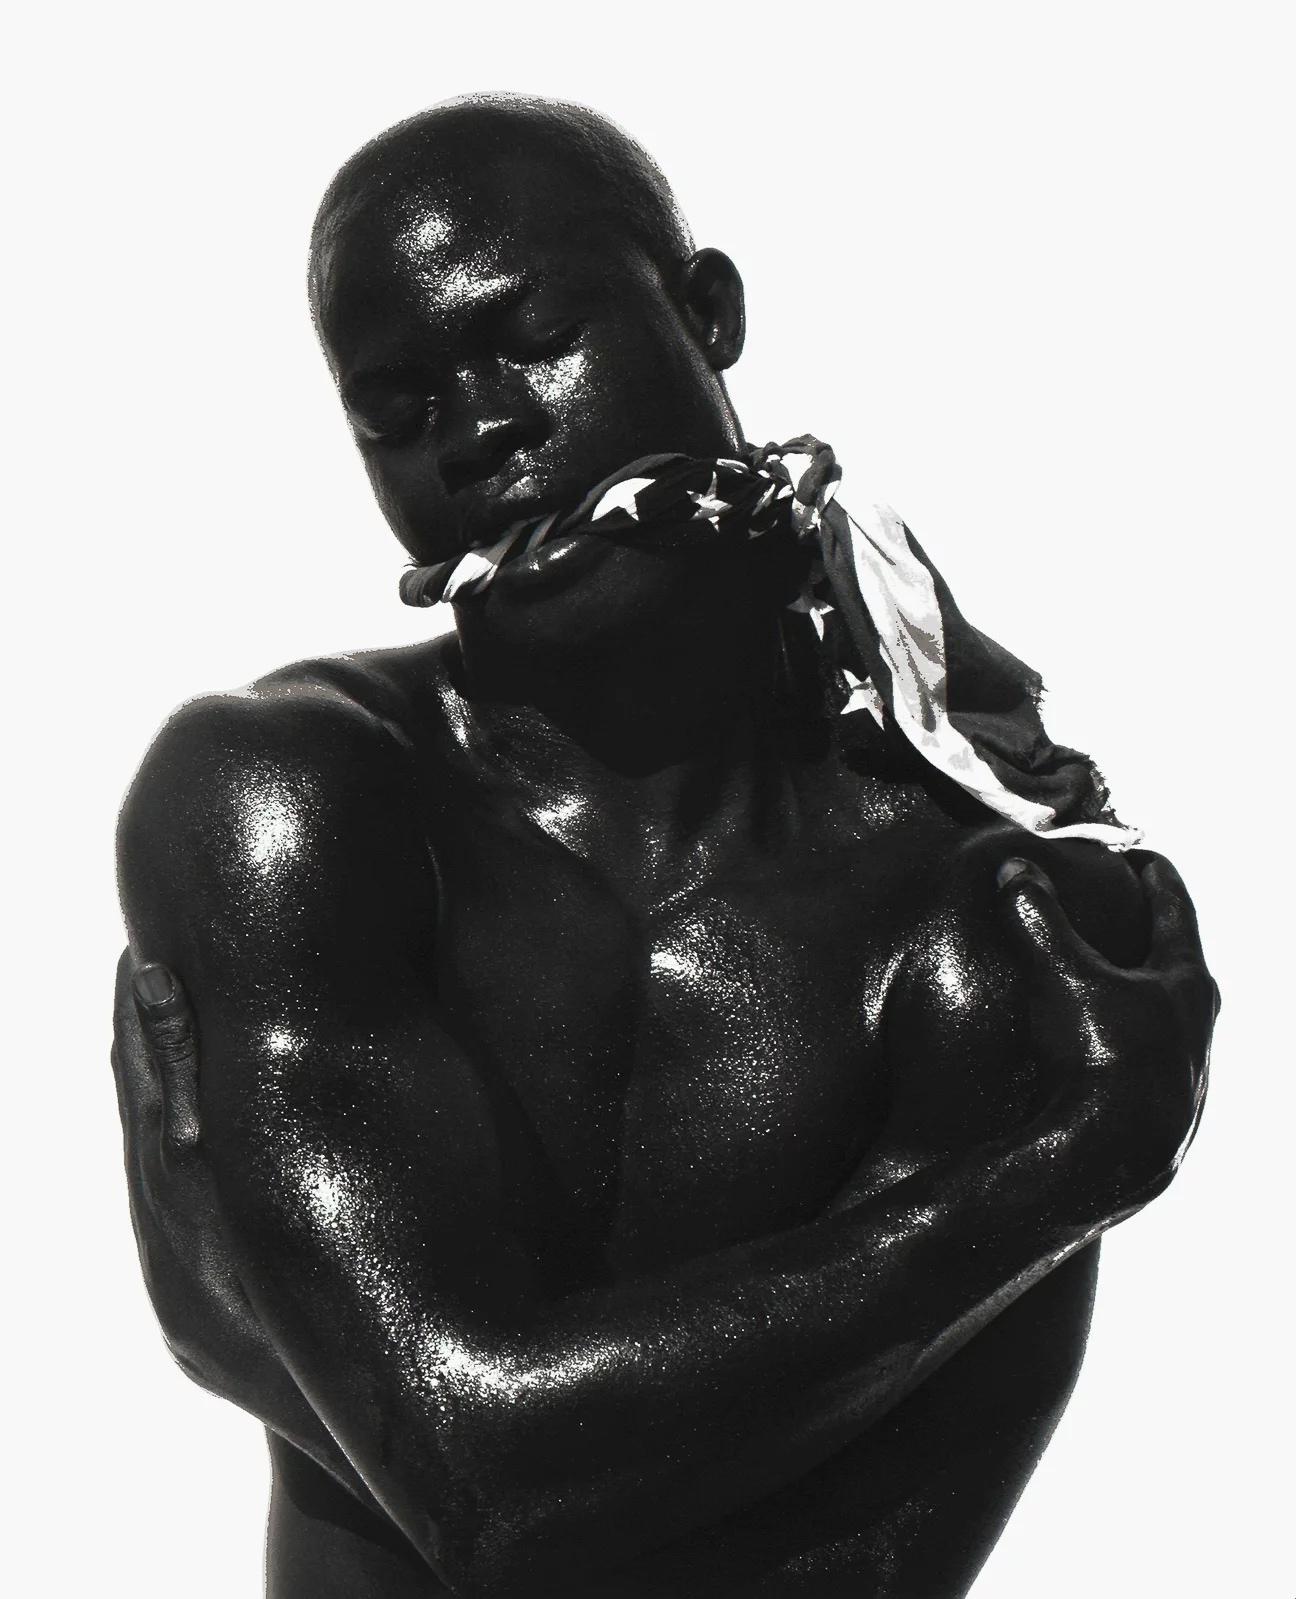 Djimon-Censored, Los Angeles - Photograph by Herb Ritts